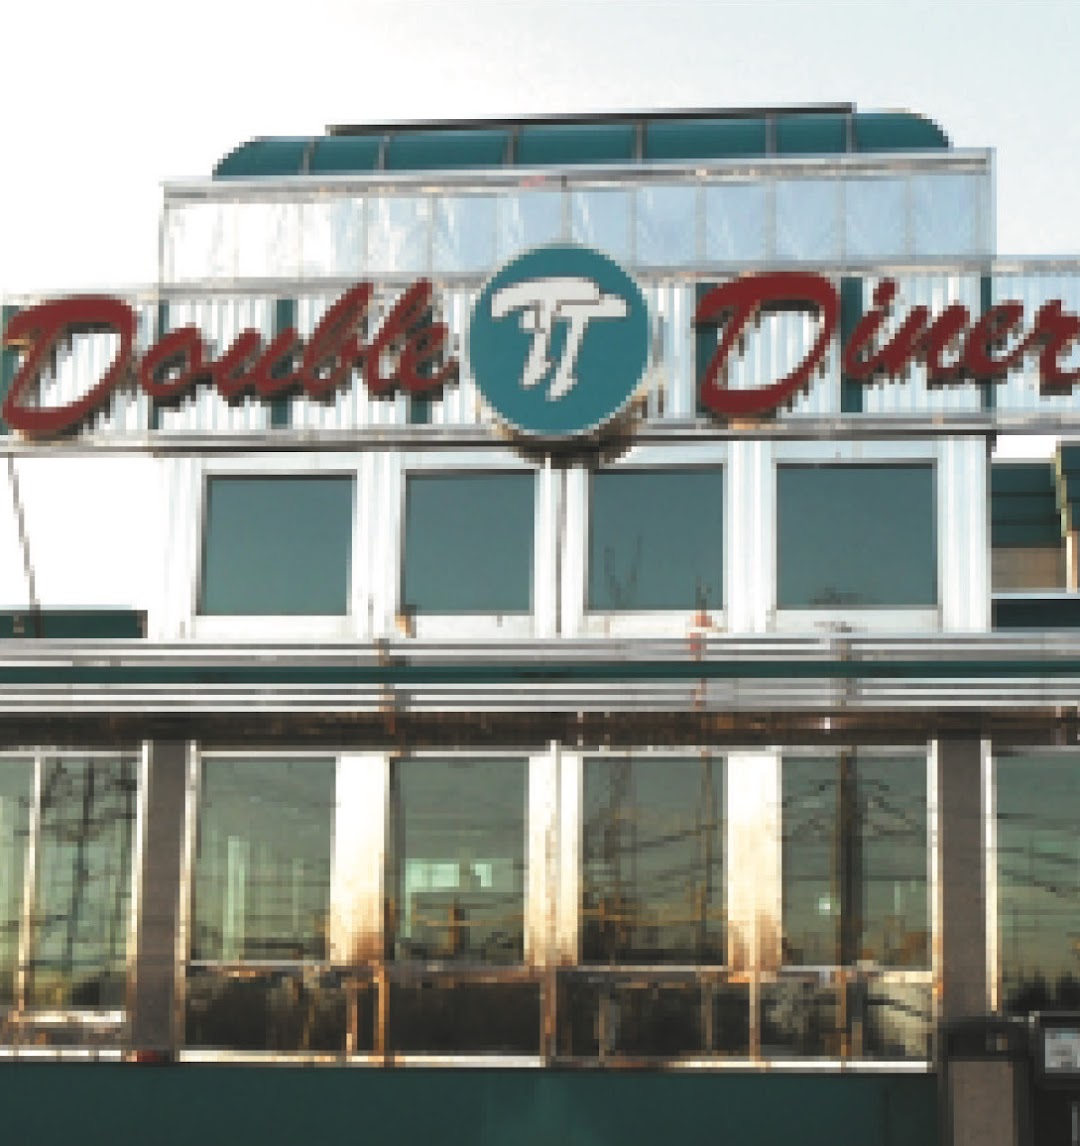 Double T Diner